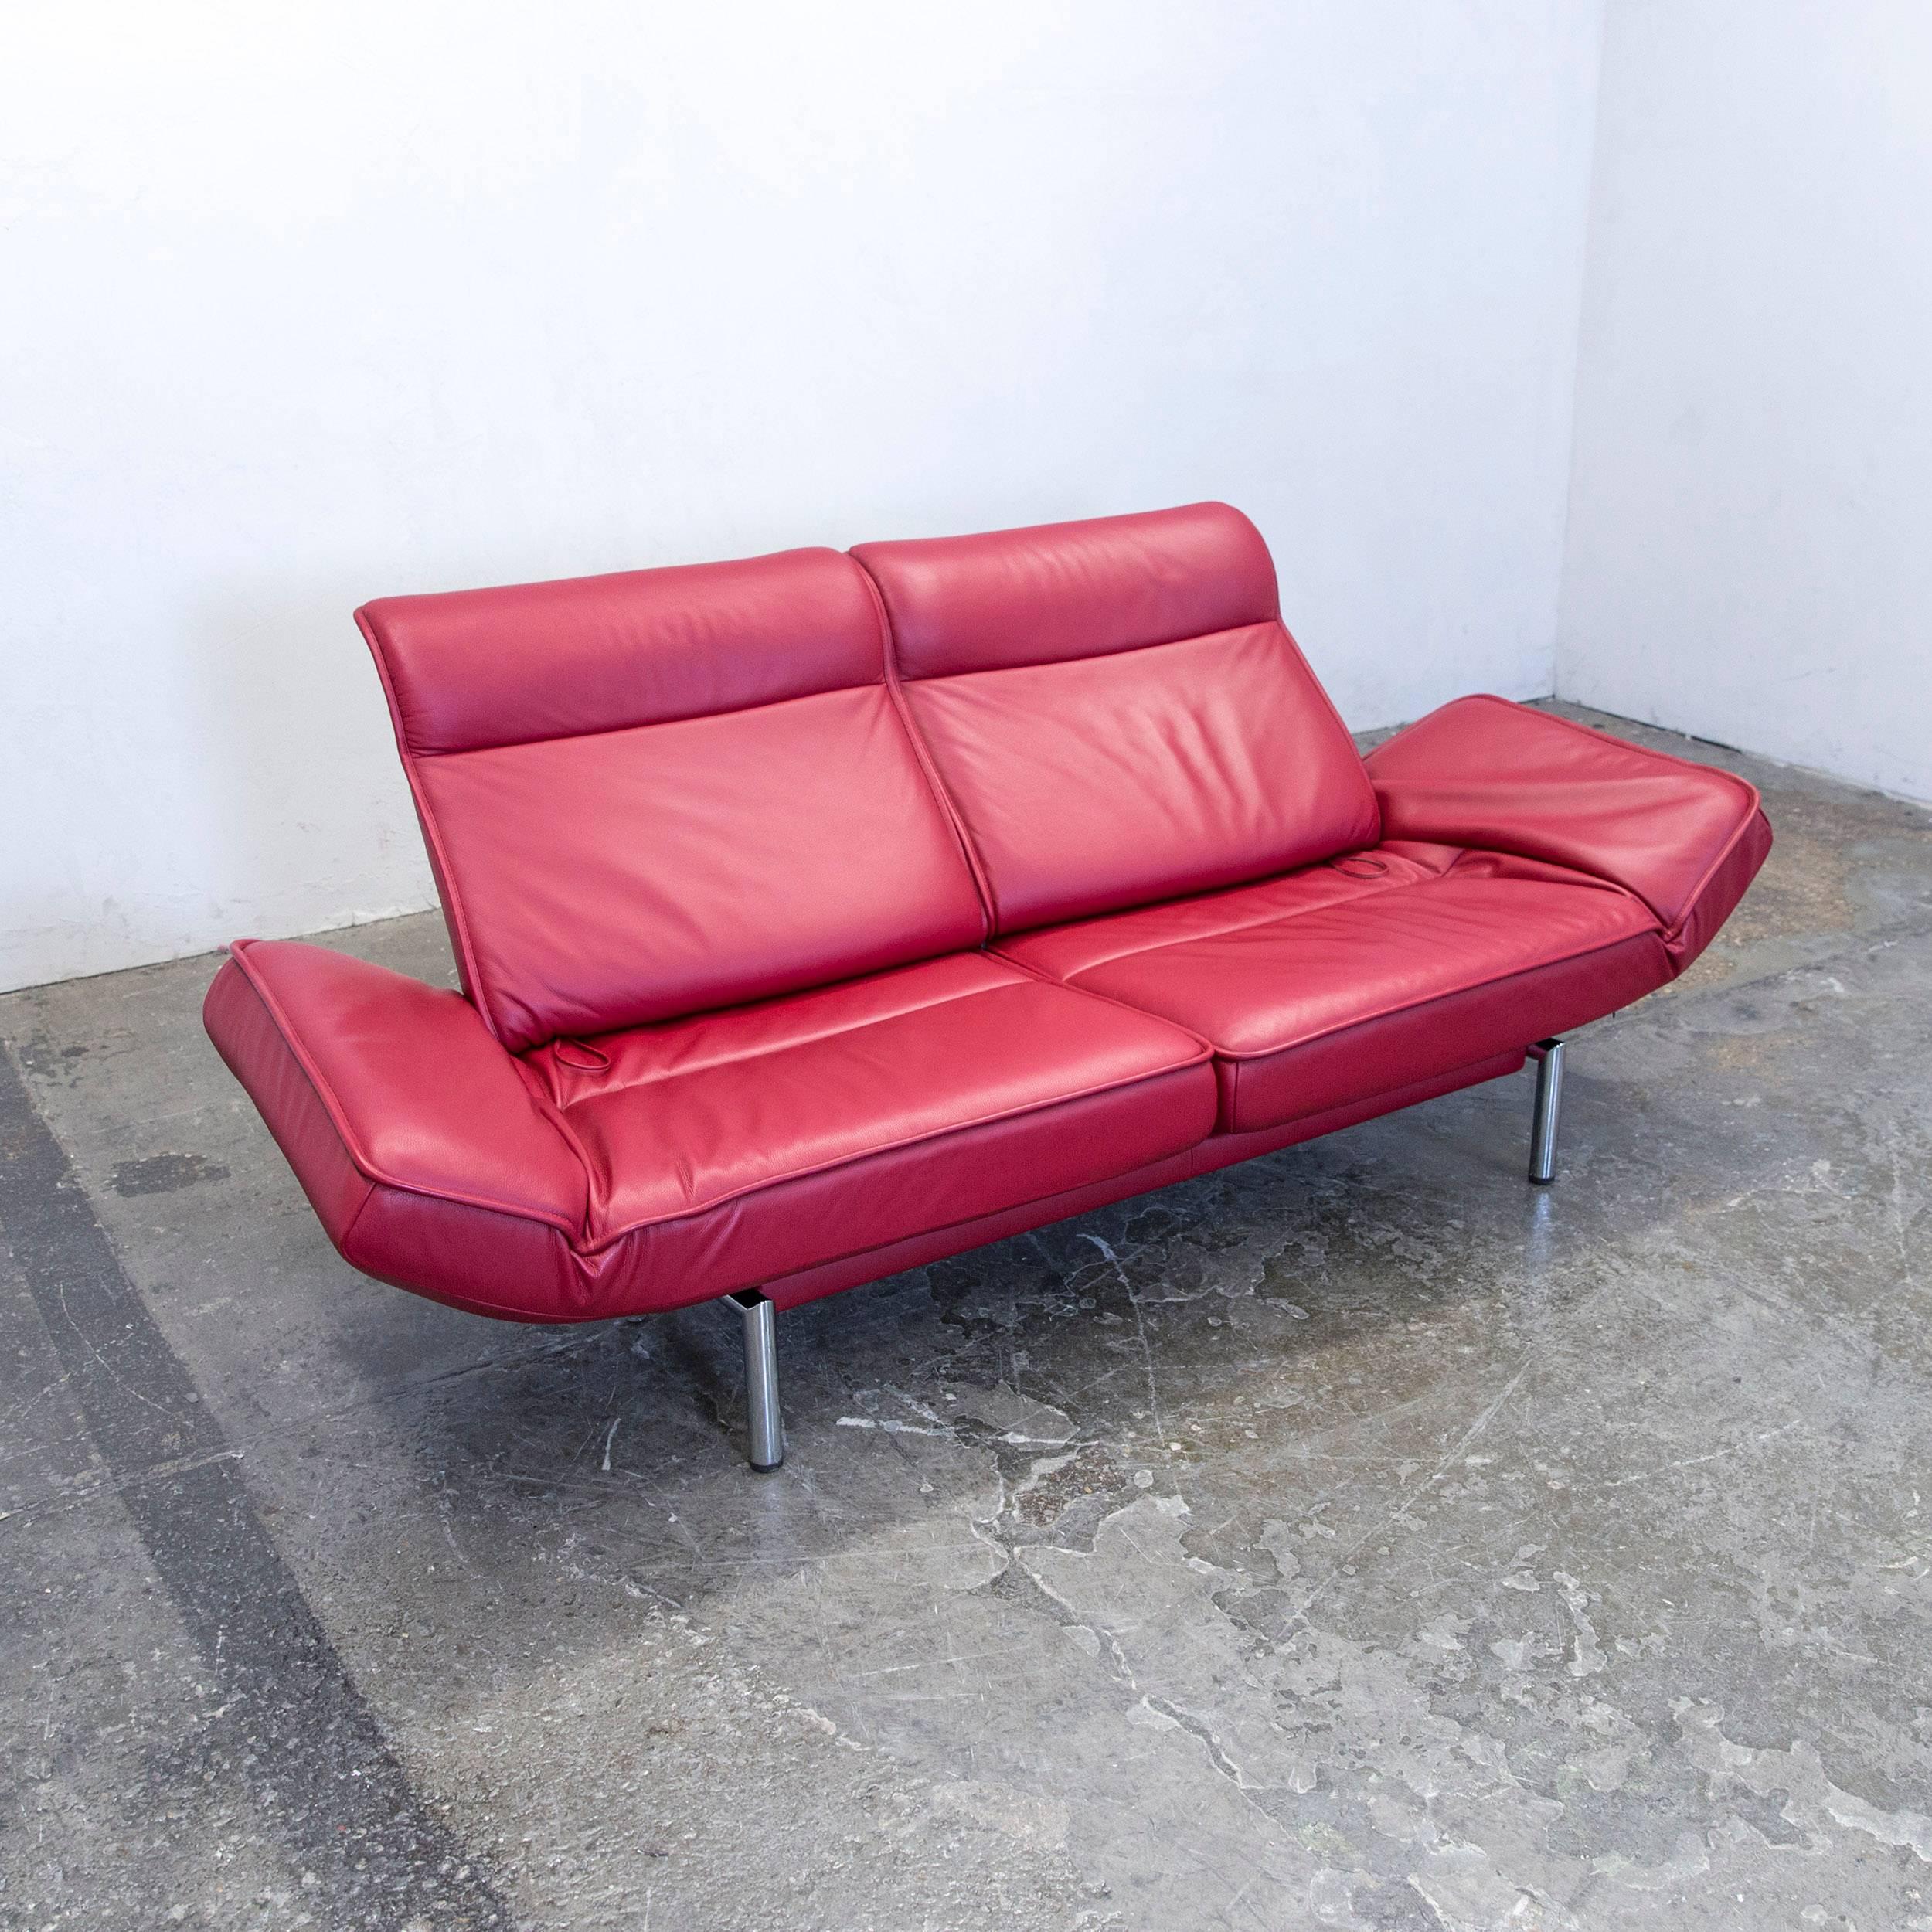 Swiss De Sede Ds 450 Designer Leather Sofa Red Relax Function Two-Seat Modern